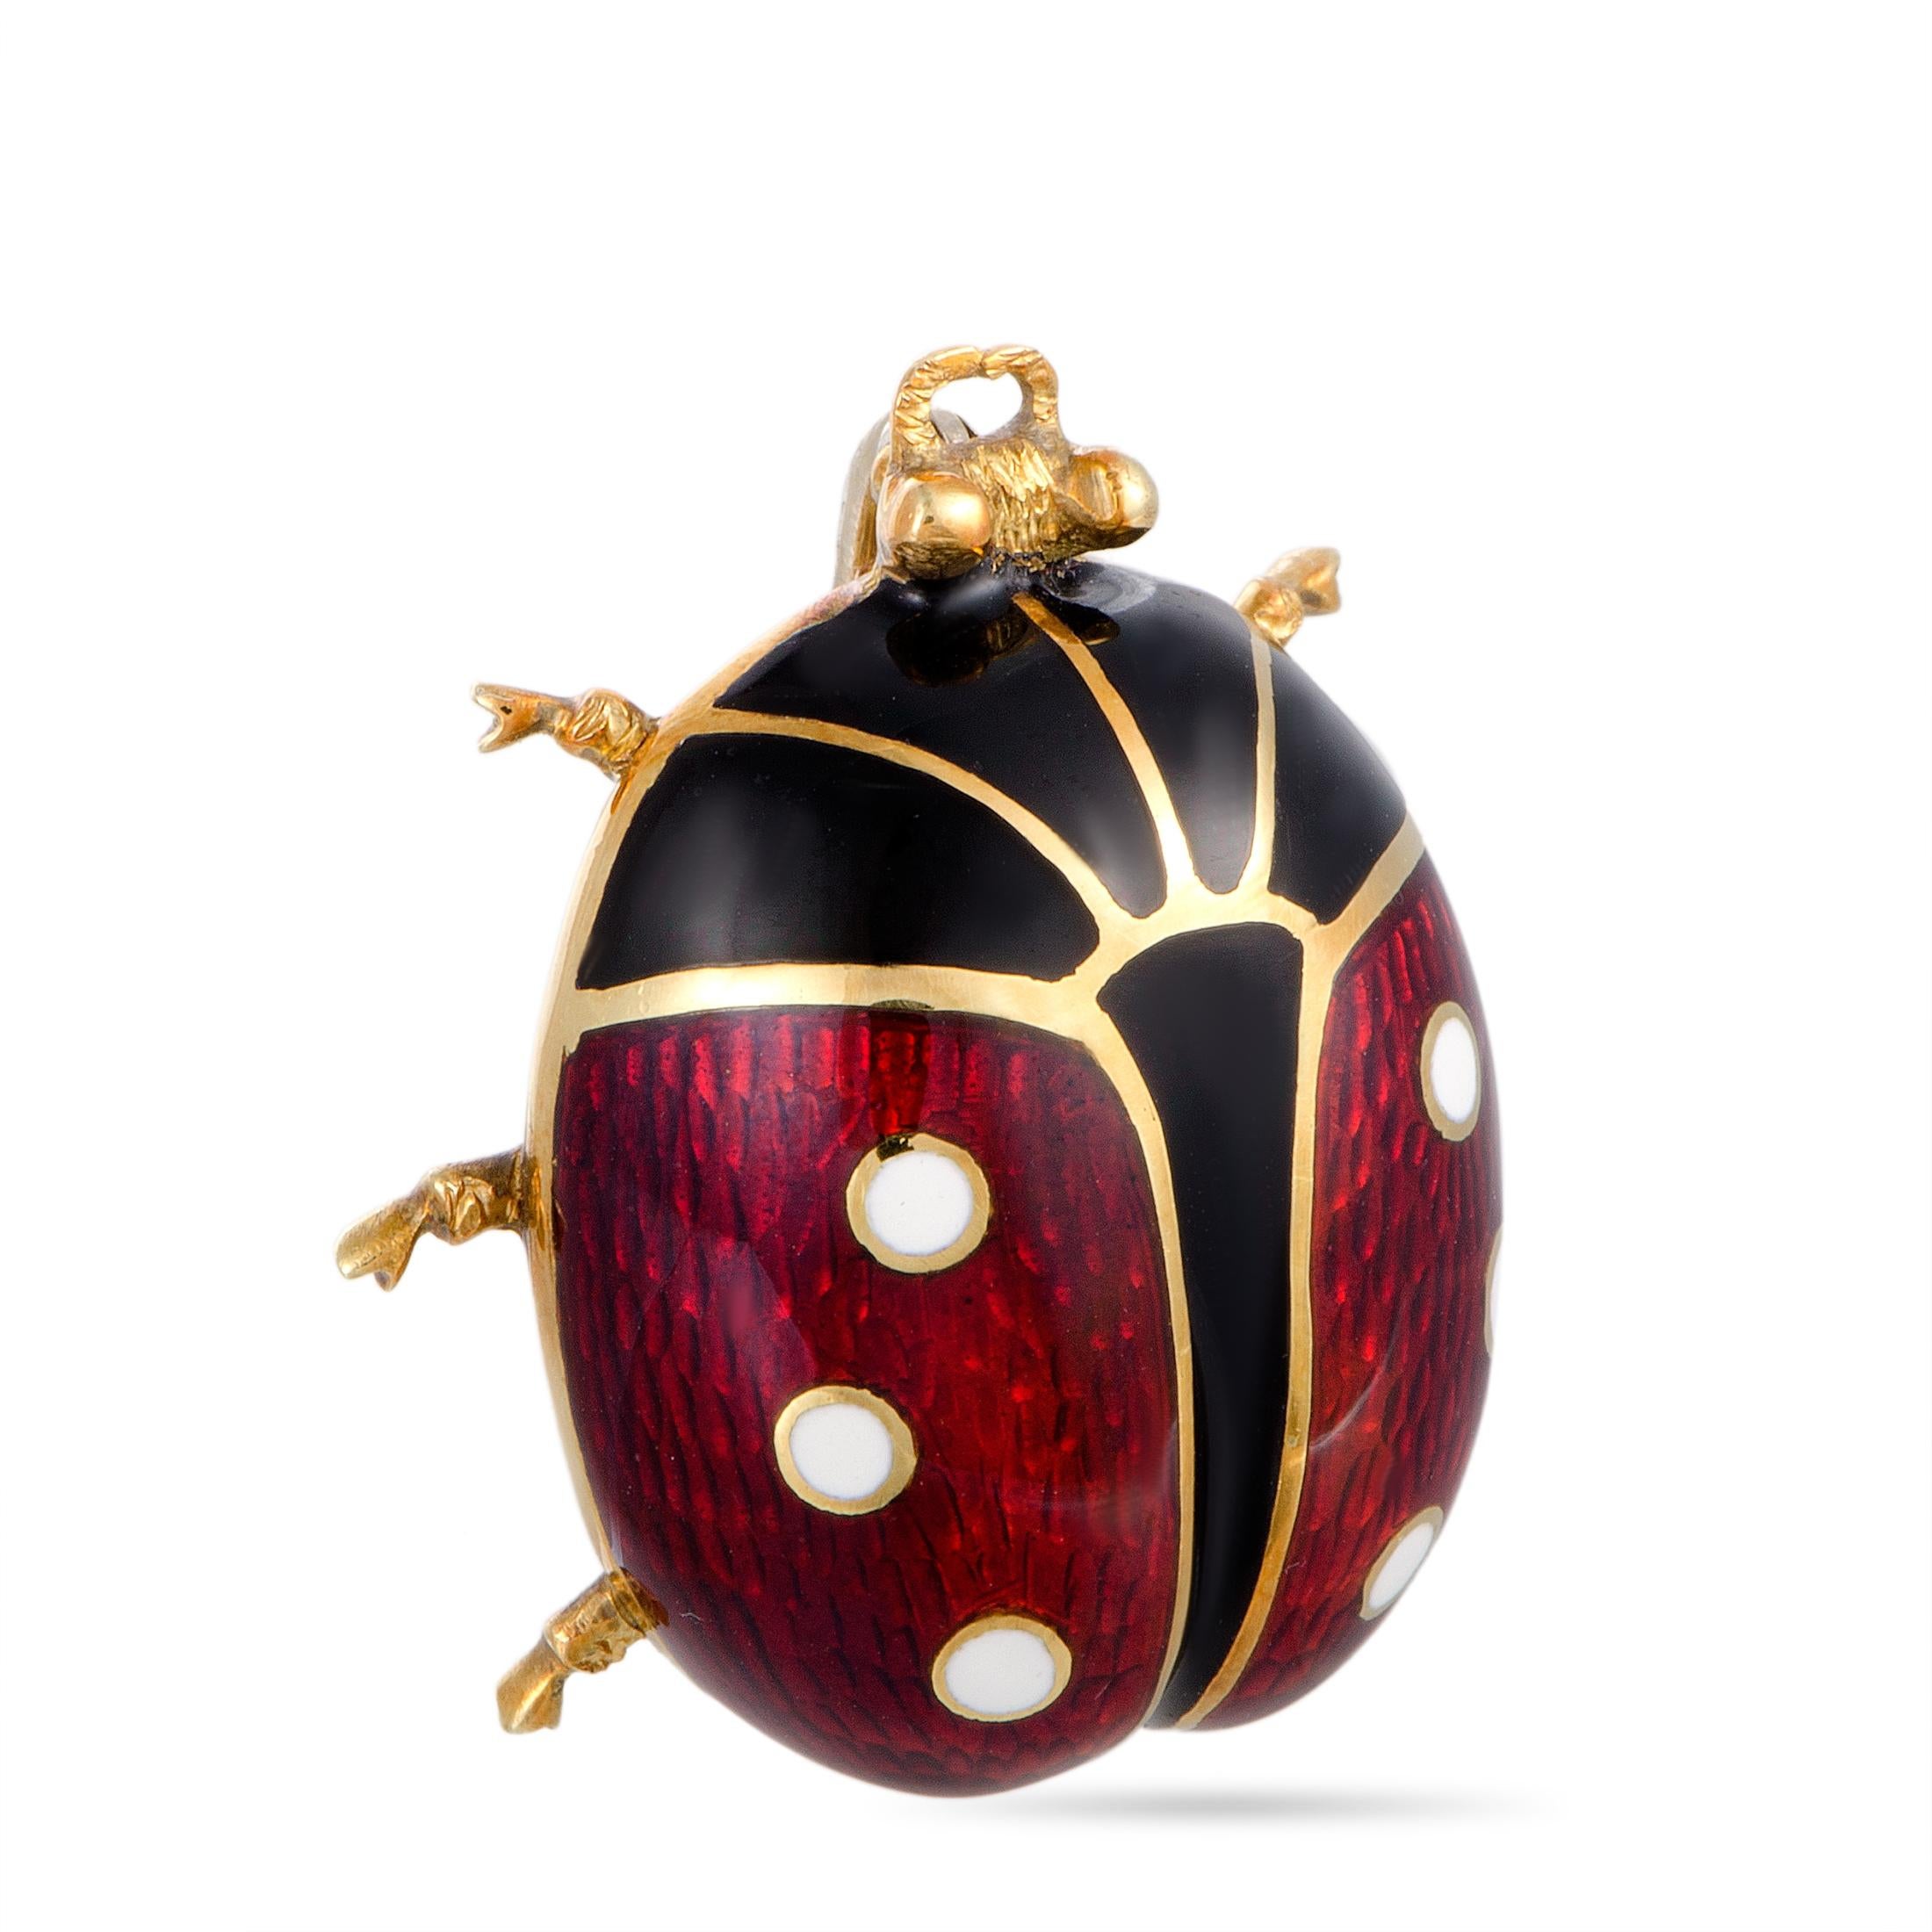 This Hidalgo ladybug brooch is made of enameled 18K yellow gold. It weighs 14 grams, measuring 1.25” in length and 1.00” in width.

The brooch is offered in estate condition and includes a gift box.
